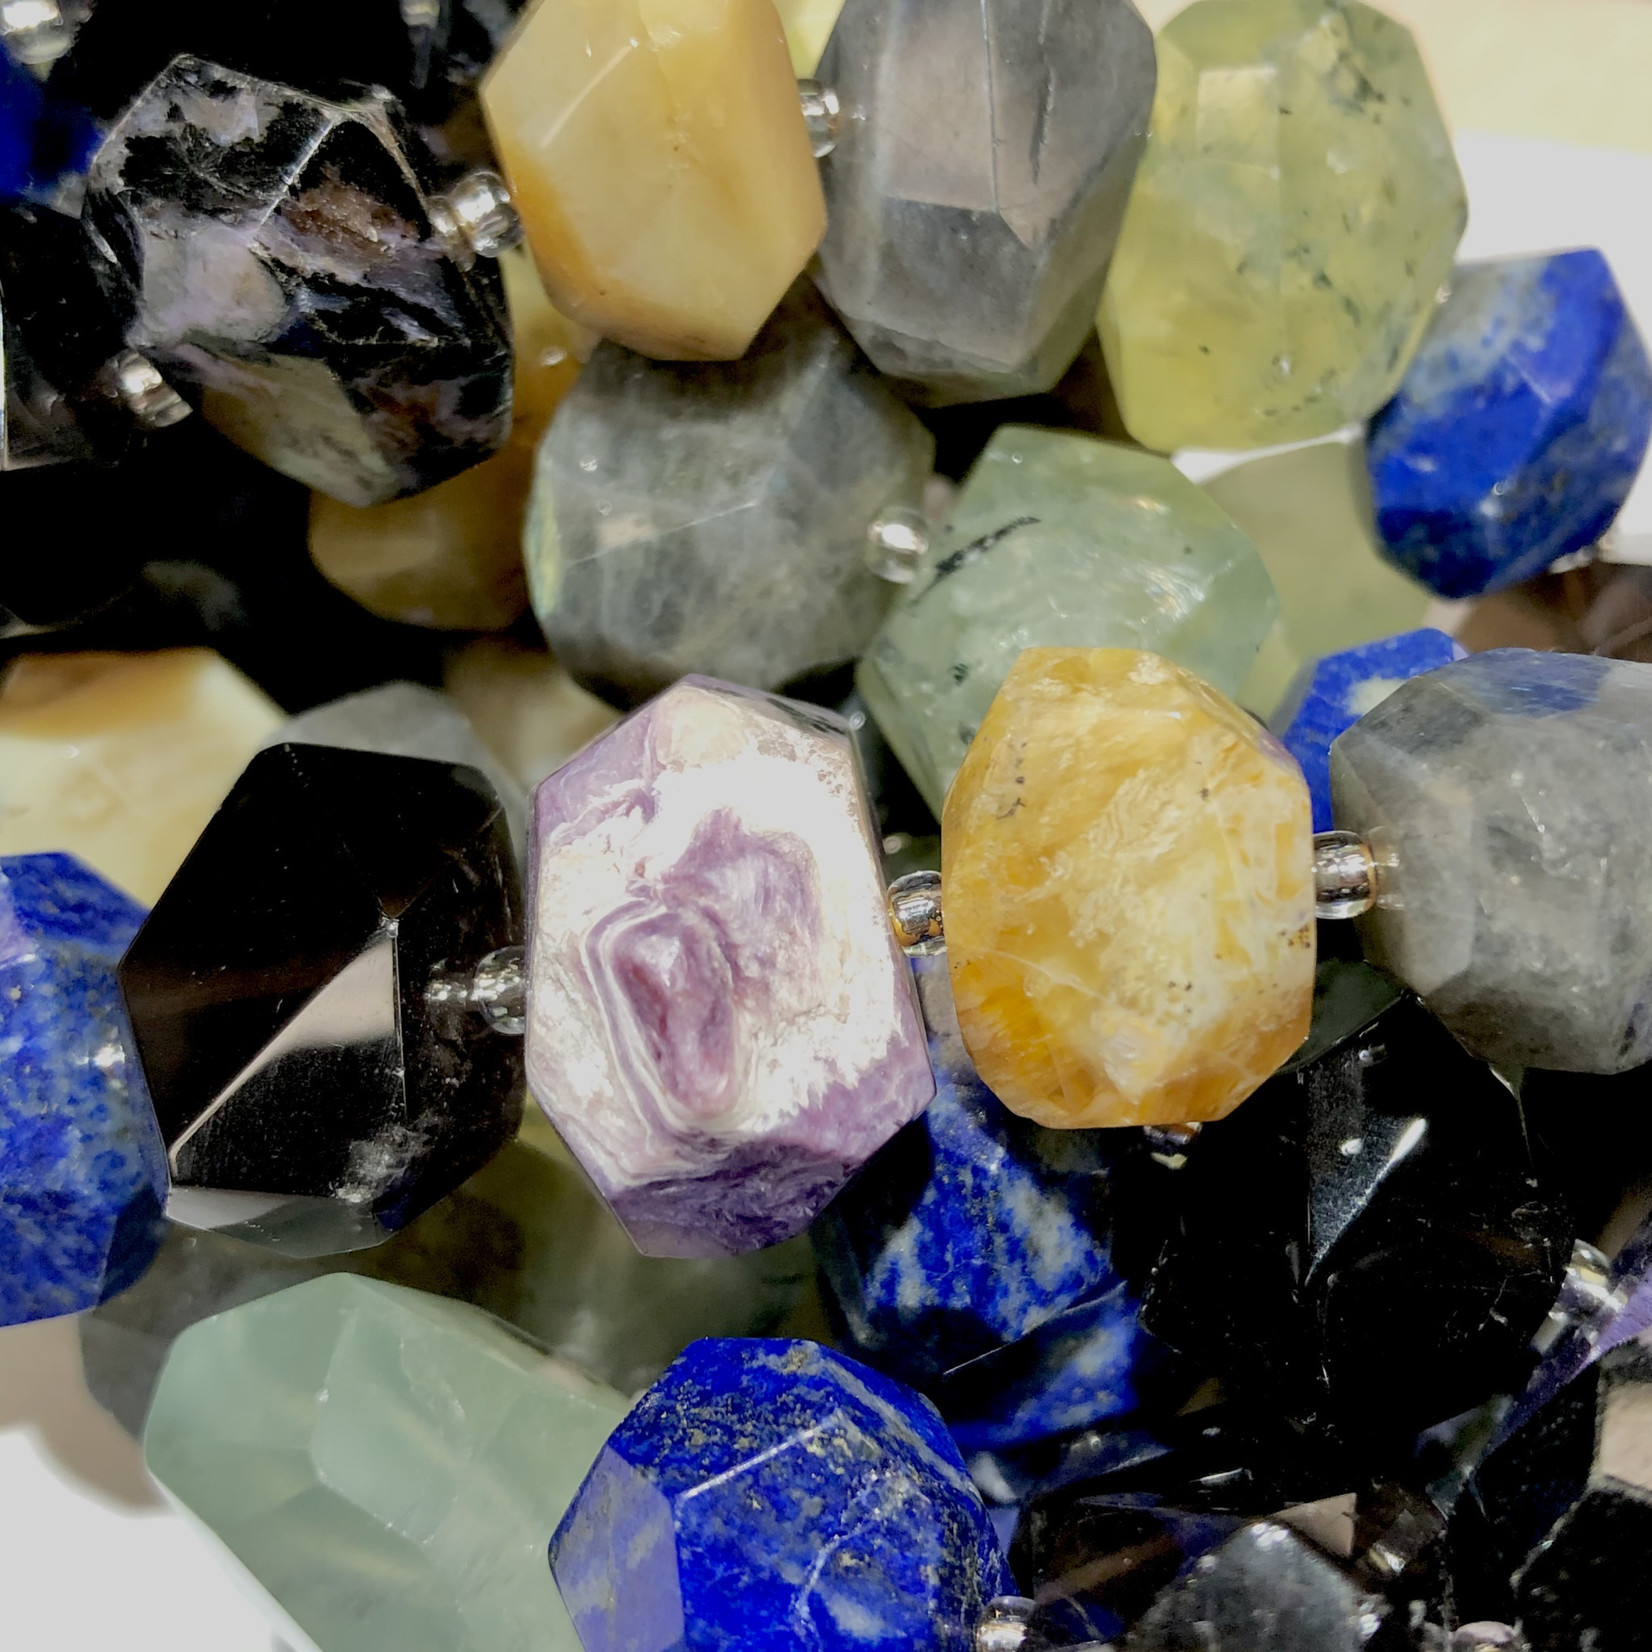 Mixed Gemstone Nuggets 18-24mm Faceted